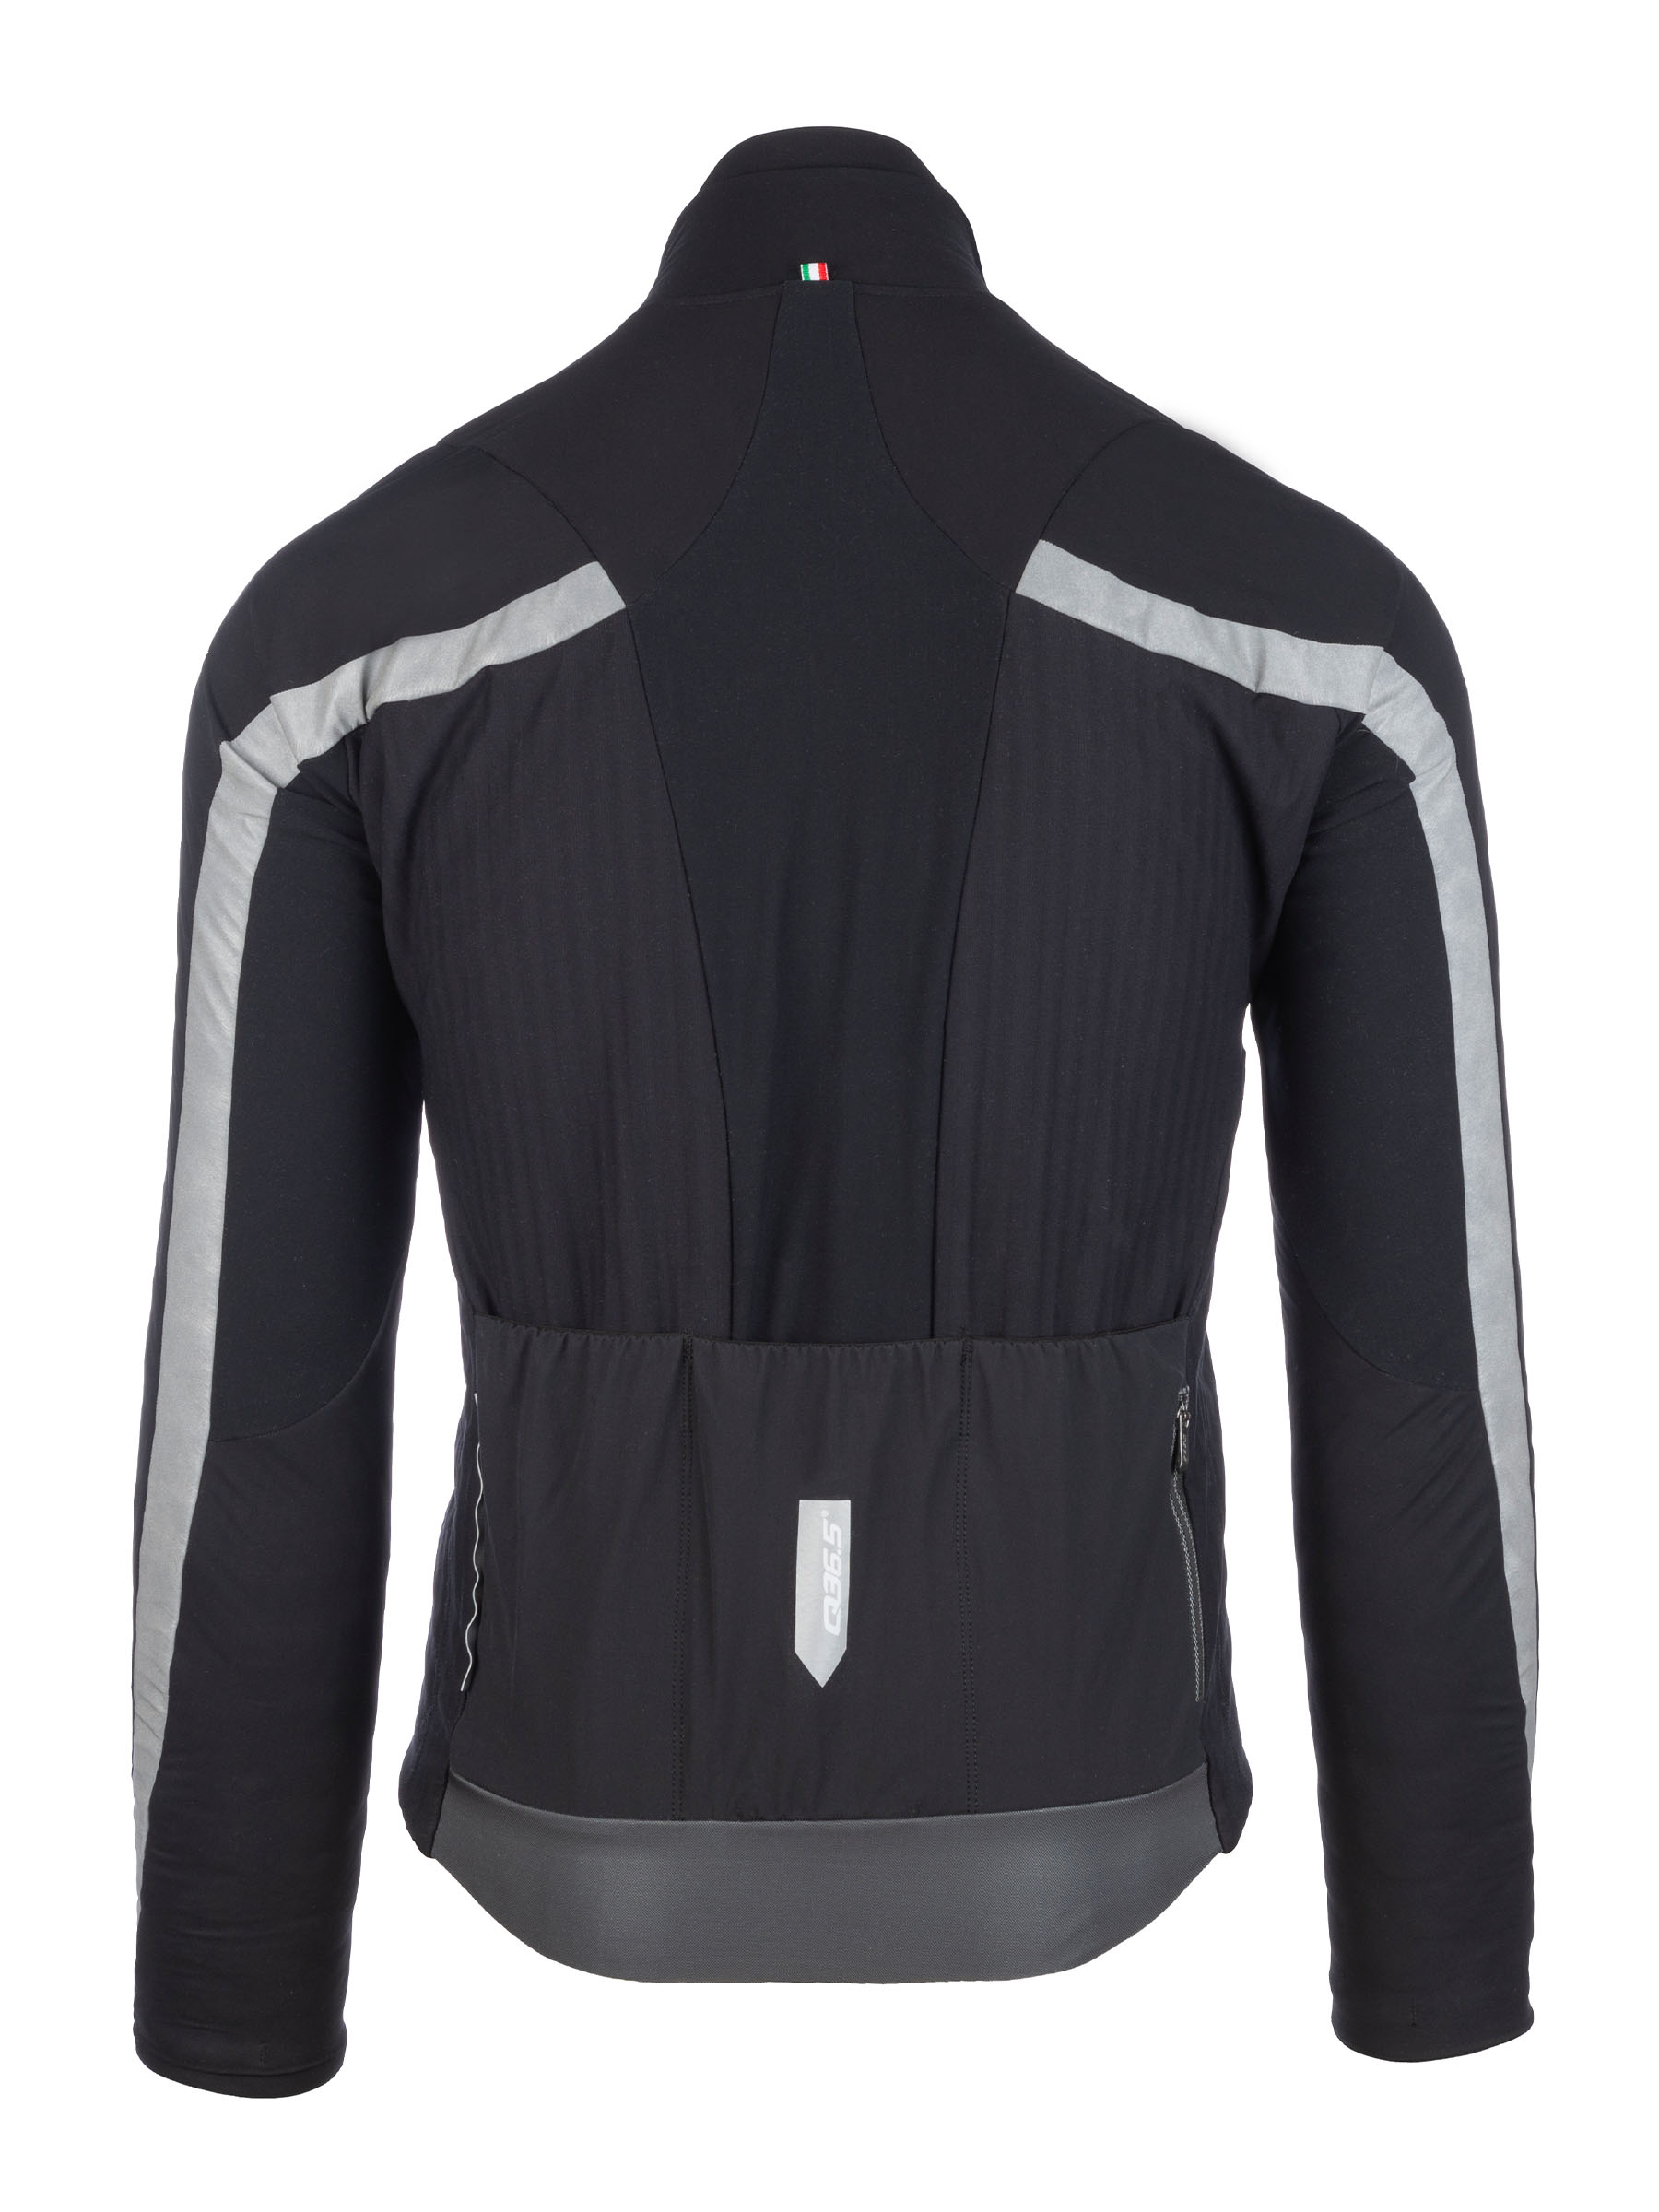 Interval Termica Jacket black, cycling winter • thermal for jacket mens